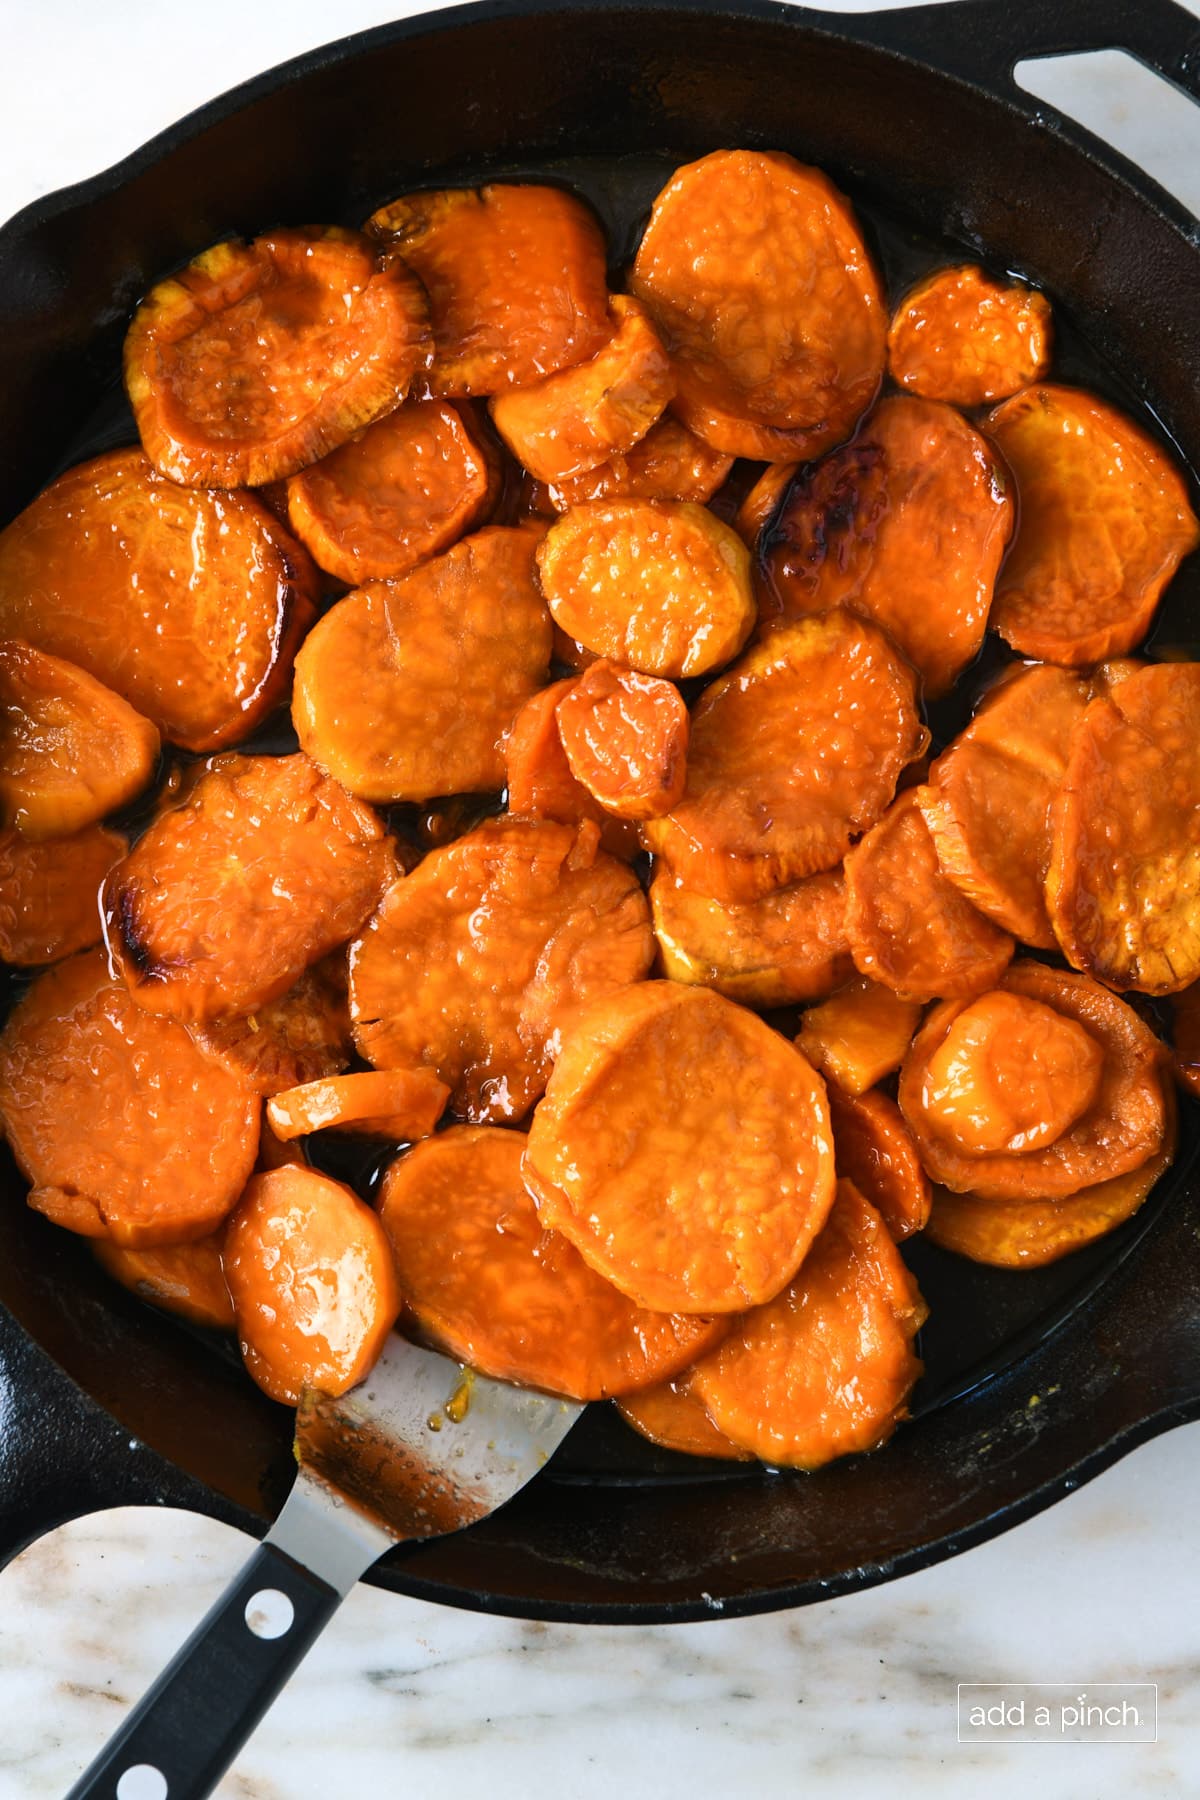 Candied sweet potatoes in a black skillet with a metal server.